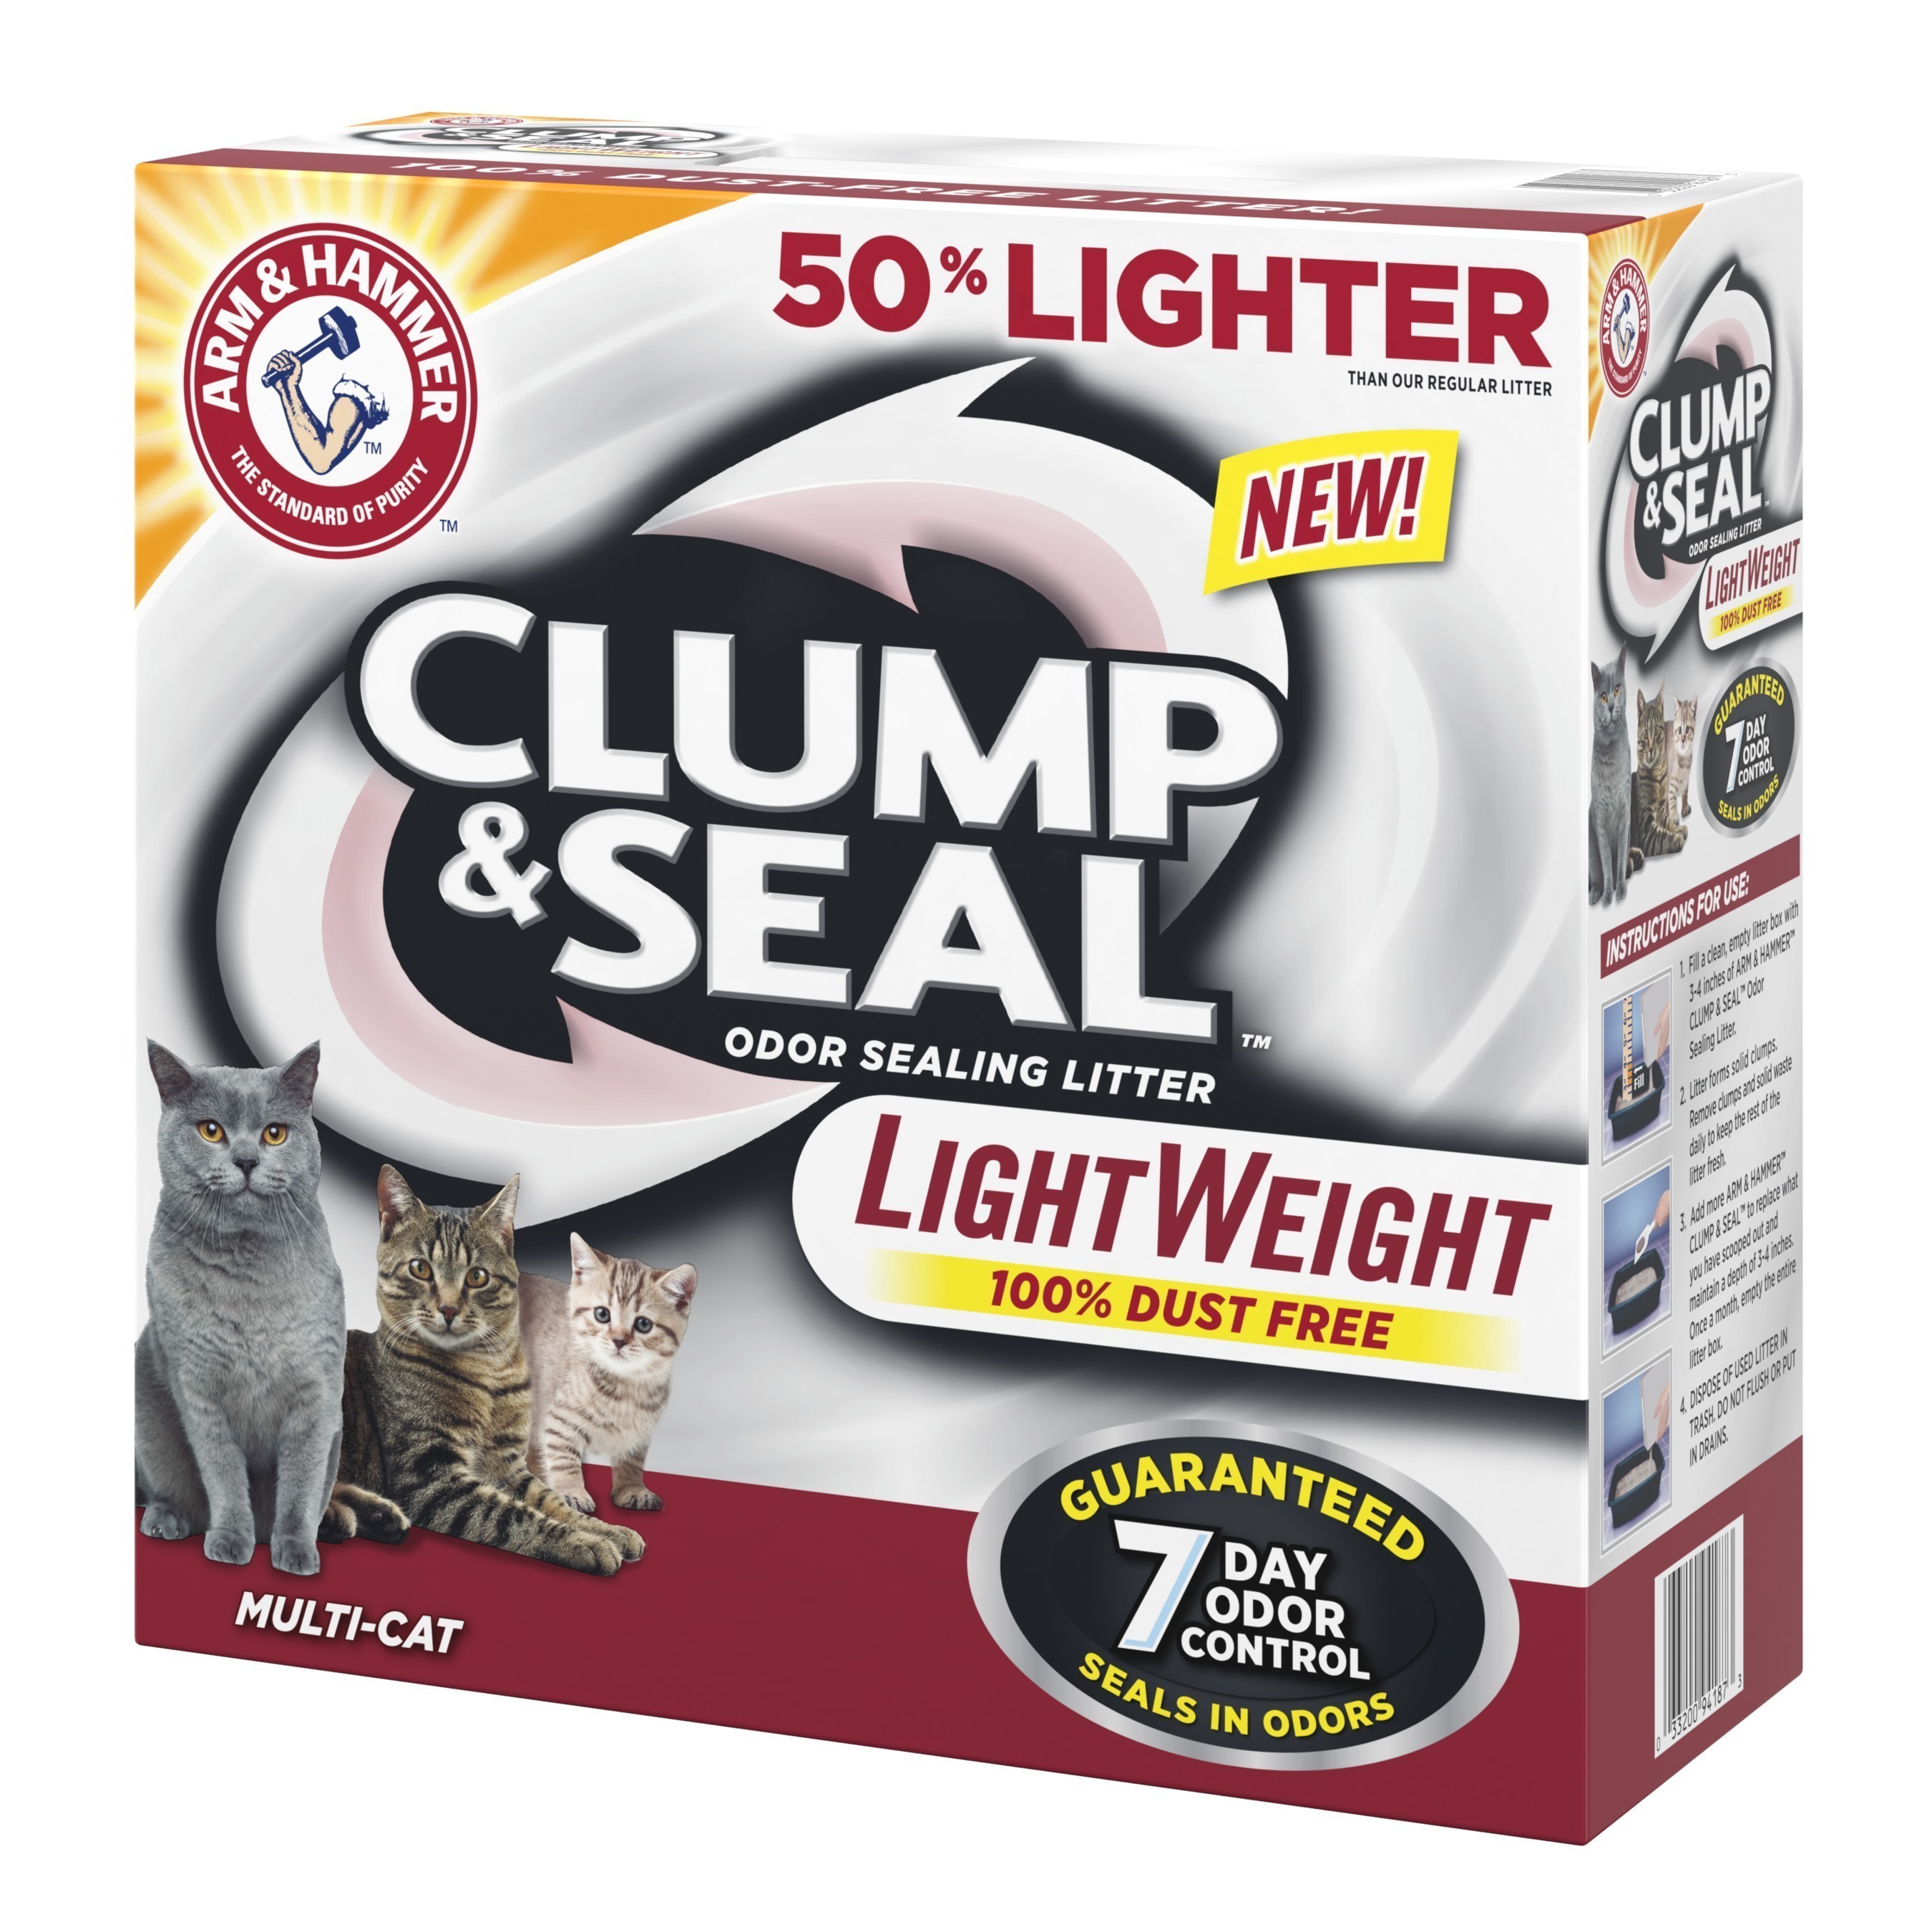 ARM & HAMMER(TM) launches Clump & Seal(TM) Lightweight Cat Litter aimed to "Lighten the Day" for cat owners